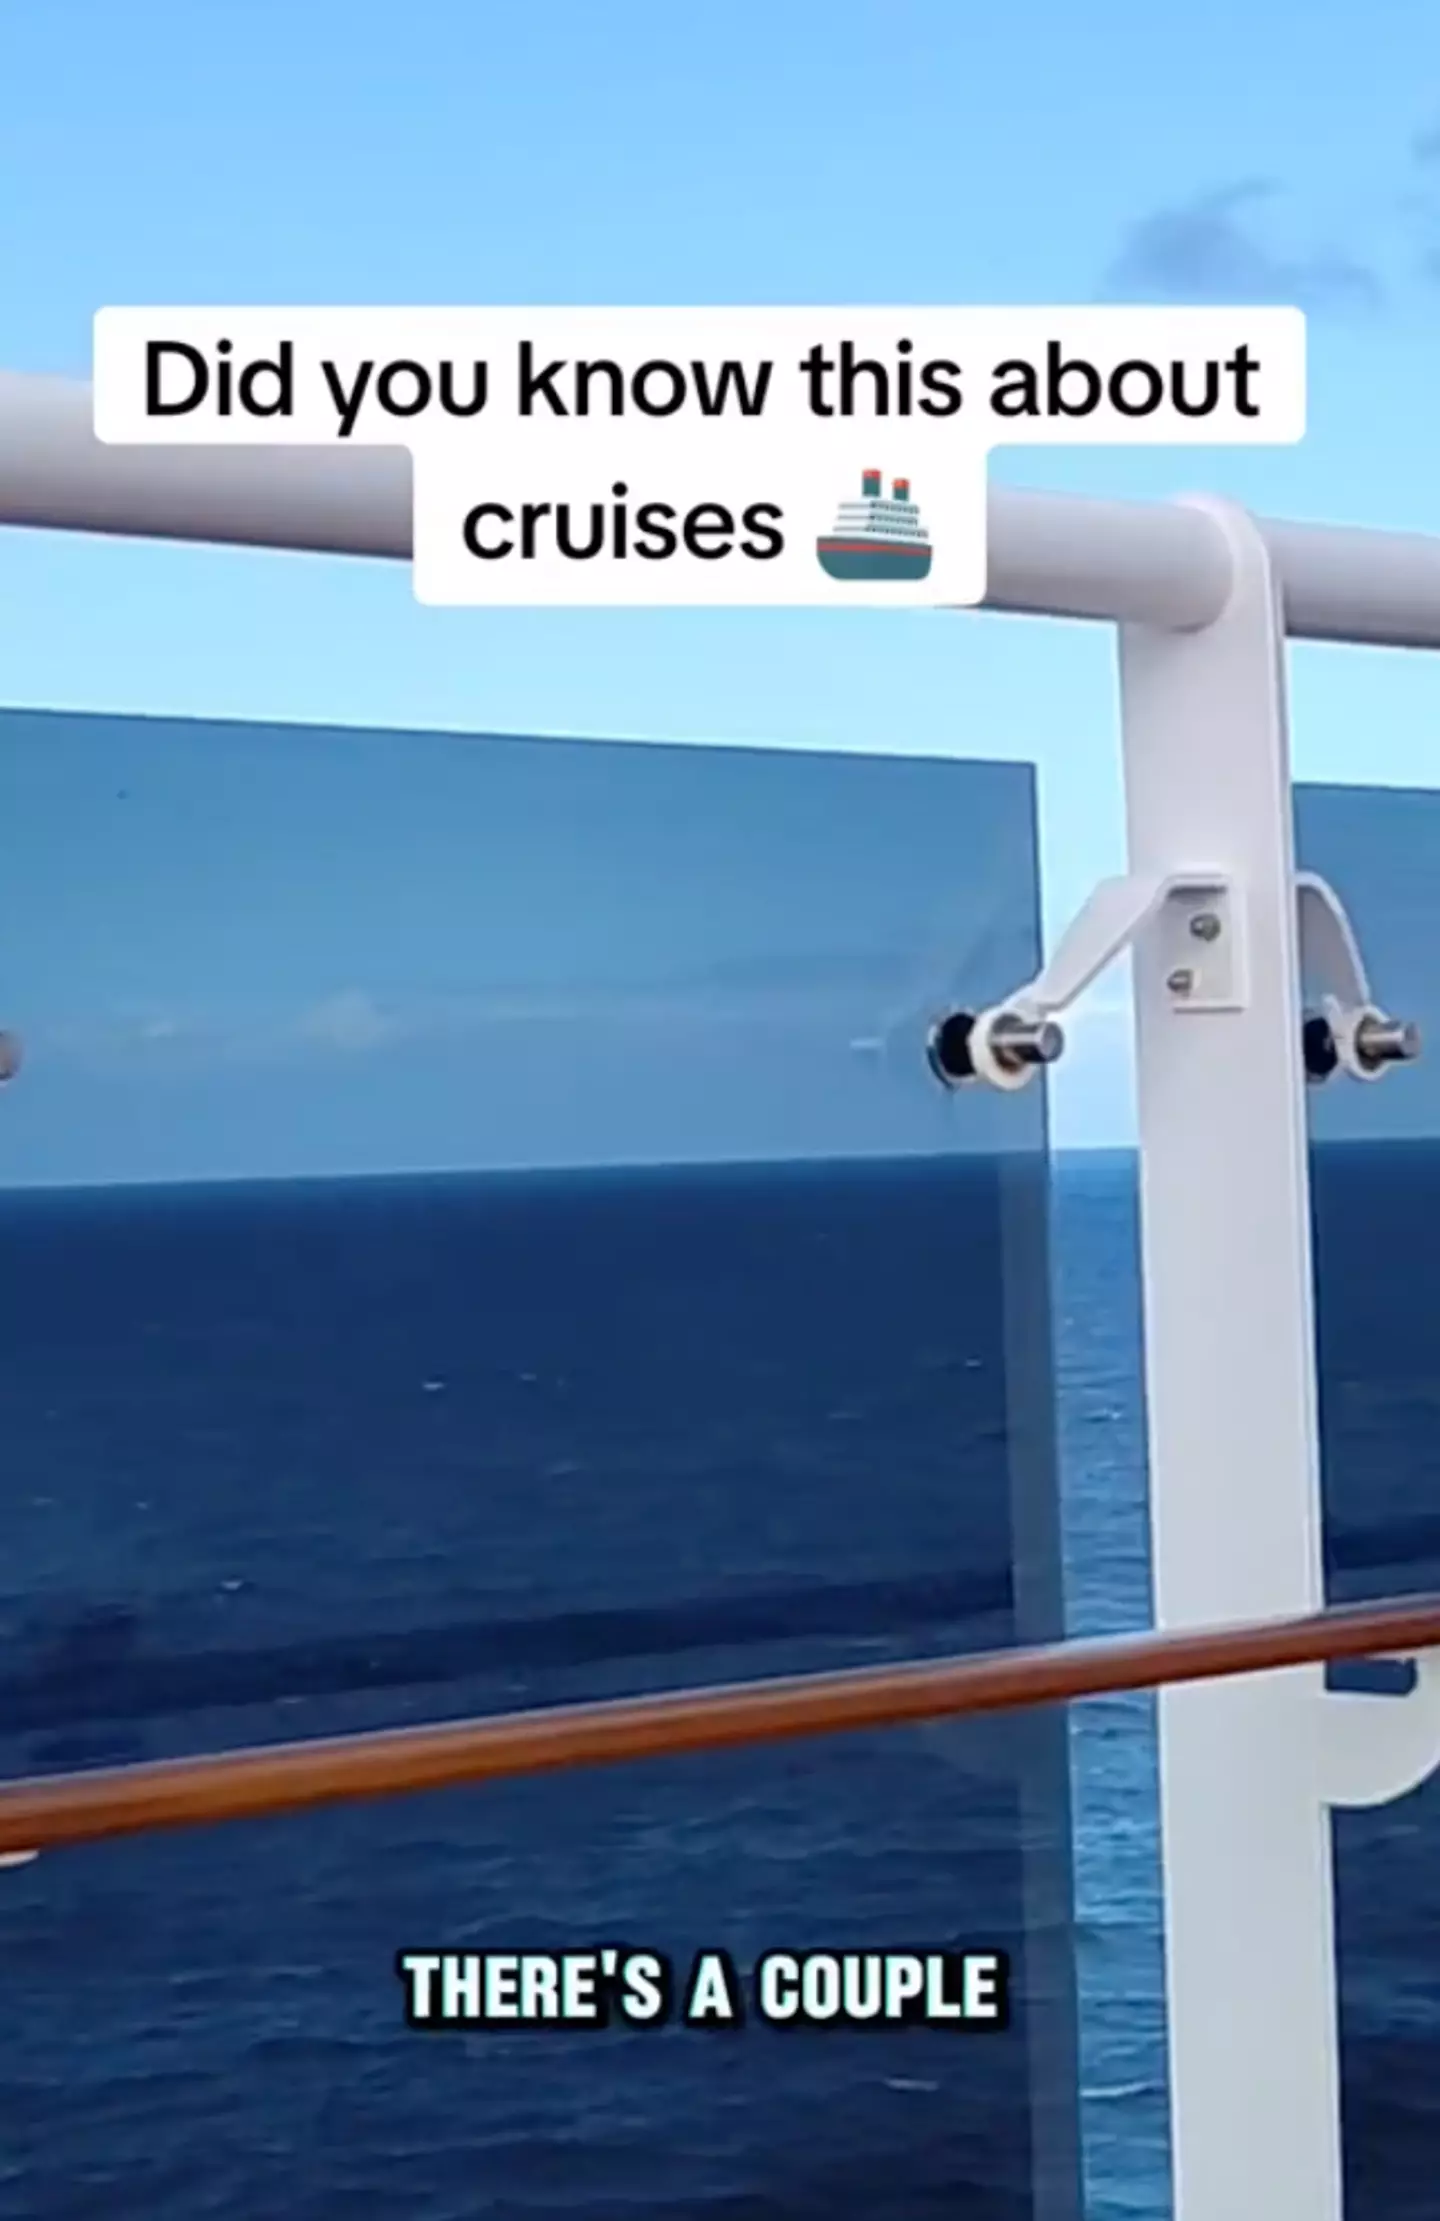 There are a couple of things that could get you thrown off a cruise.